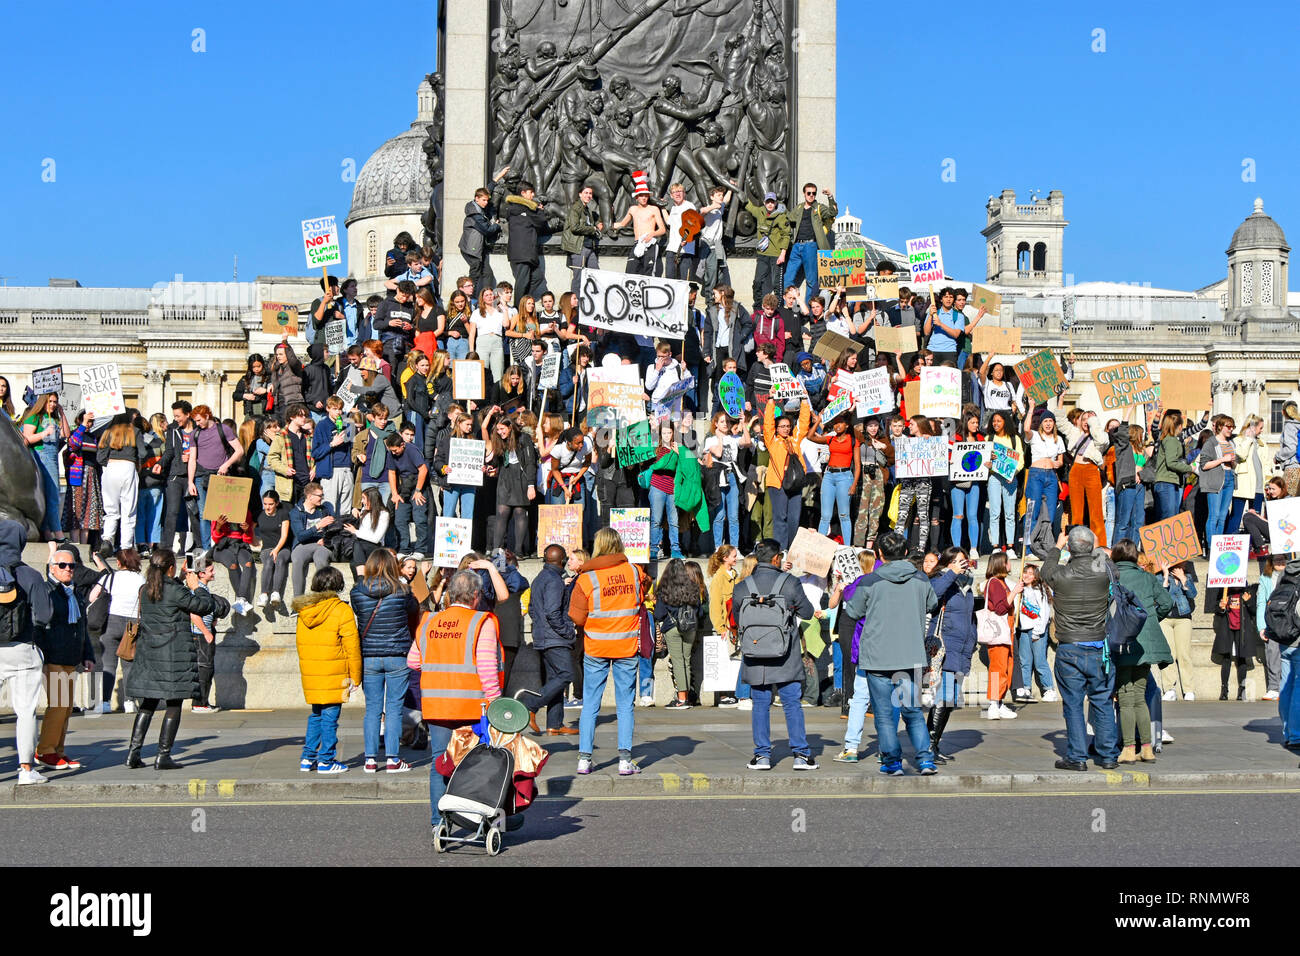 Teenager groups of school children kids miss school to strike & protest on climate change wave placard & chant from  Nelsons Column London England UK Stock Photo